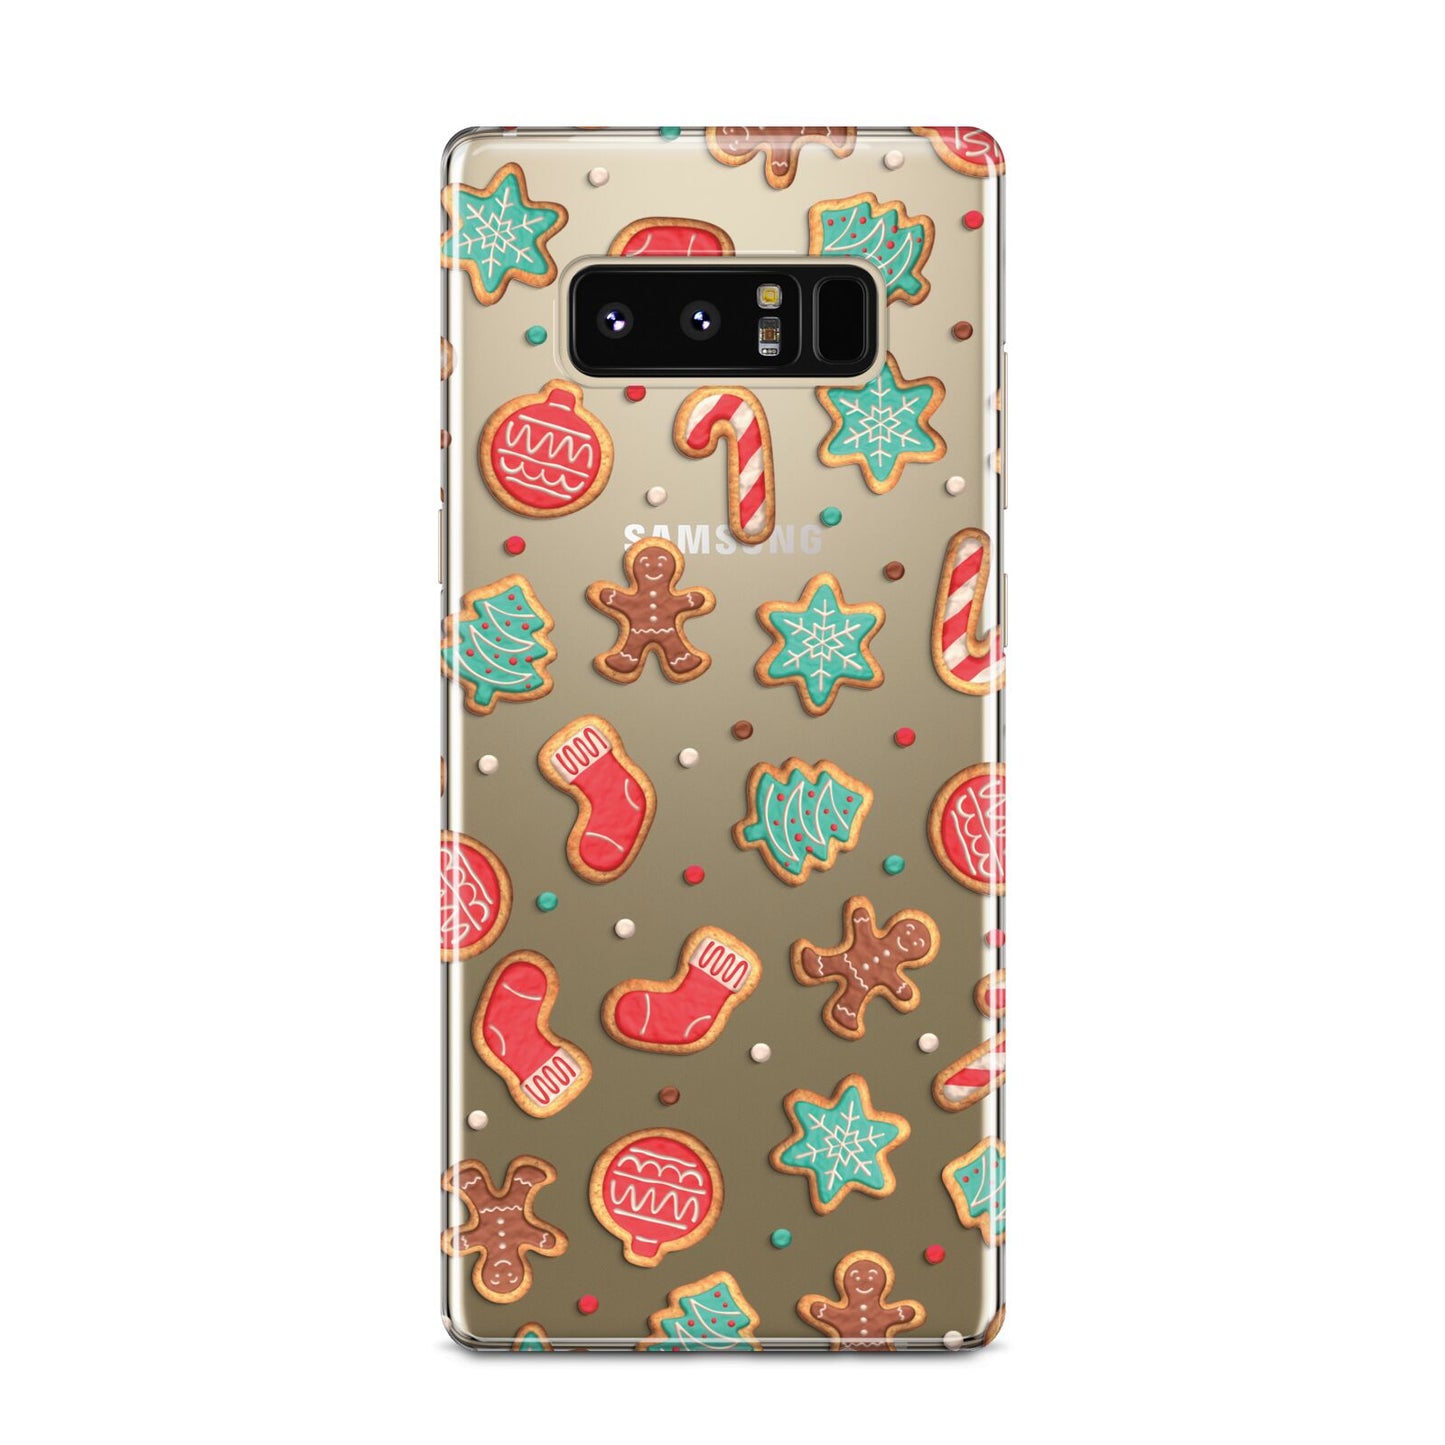 Gingerbread Christmas Samsung Galaxy Note 8 Case